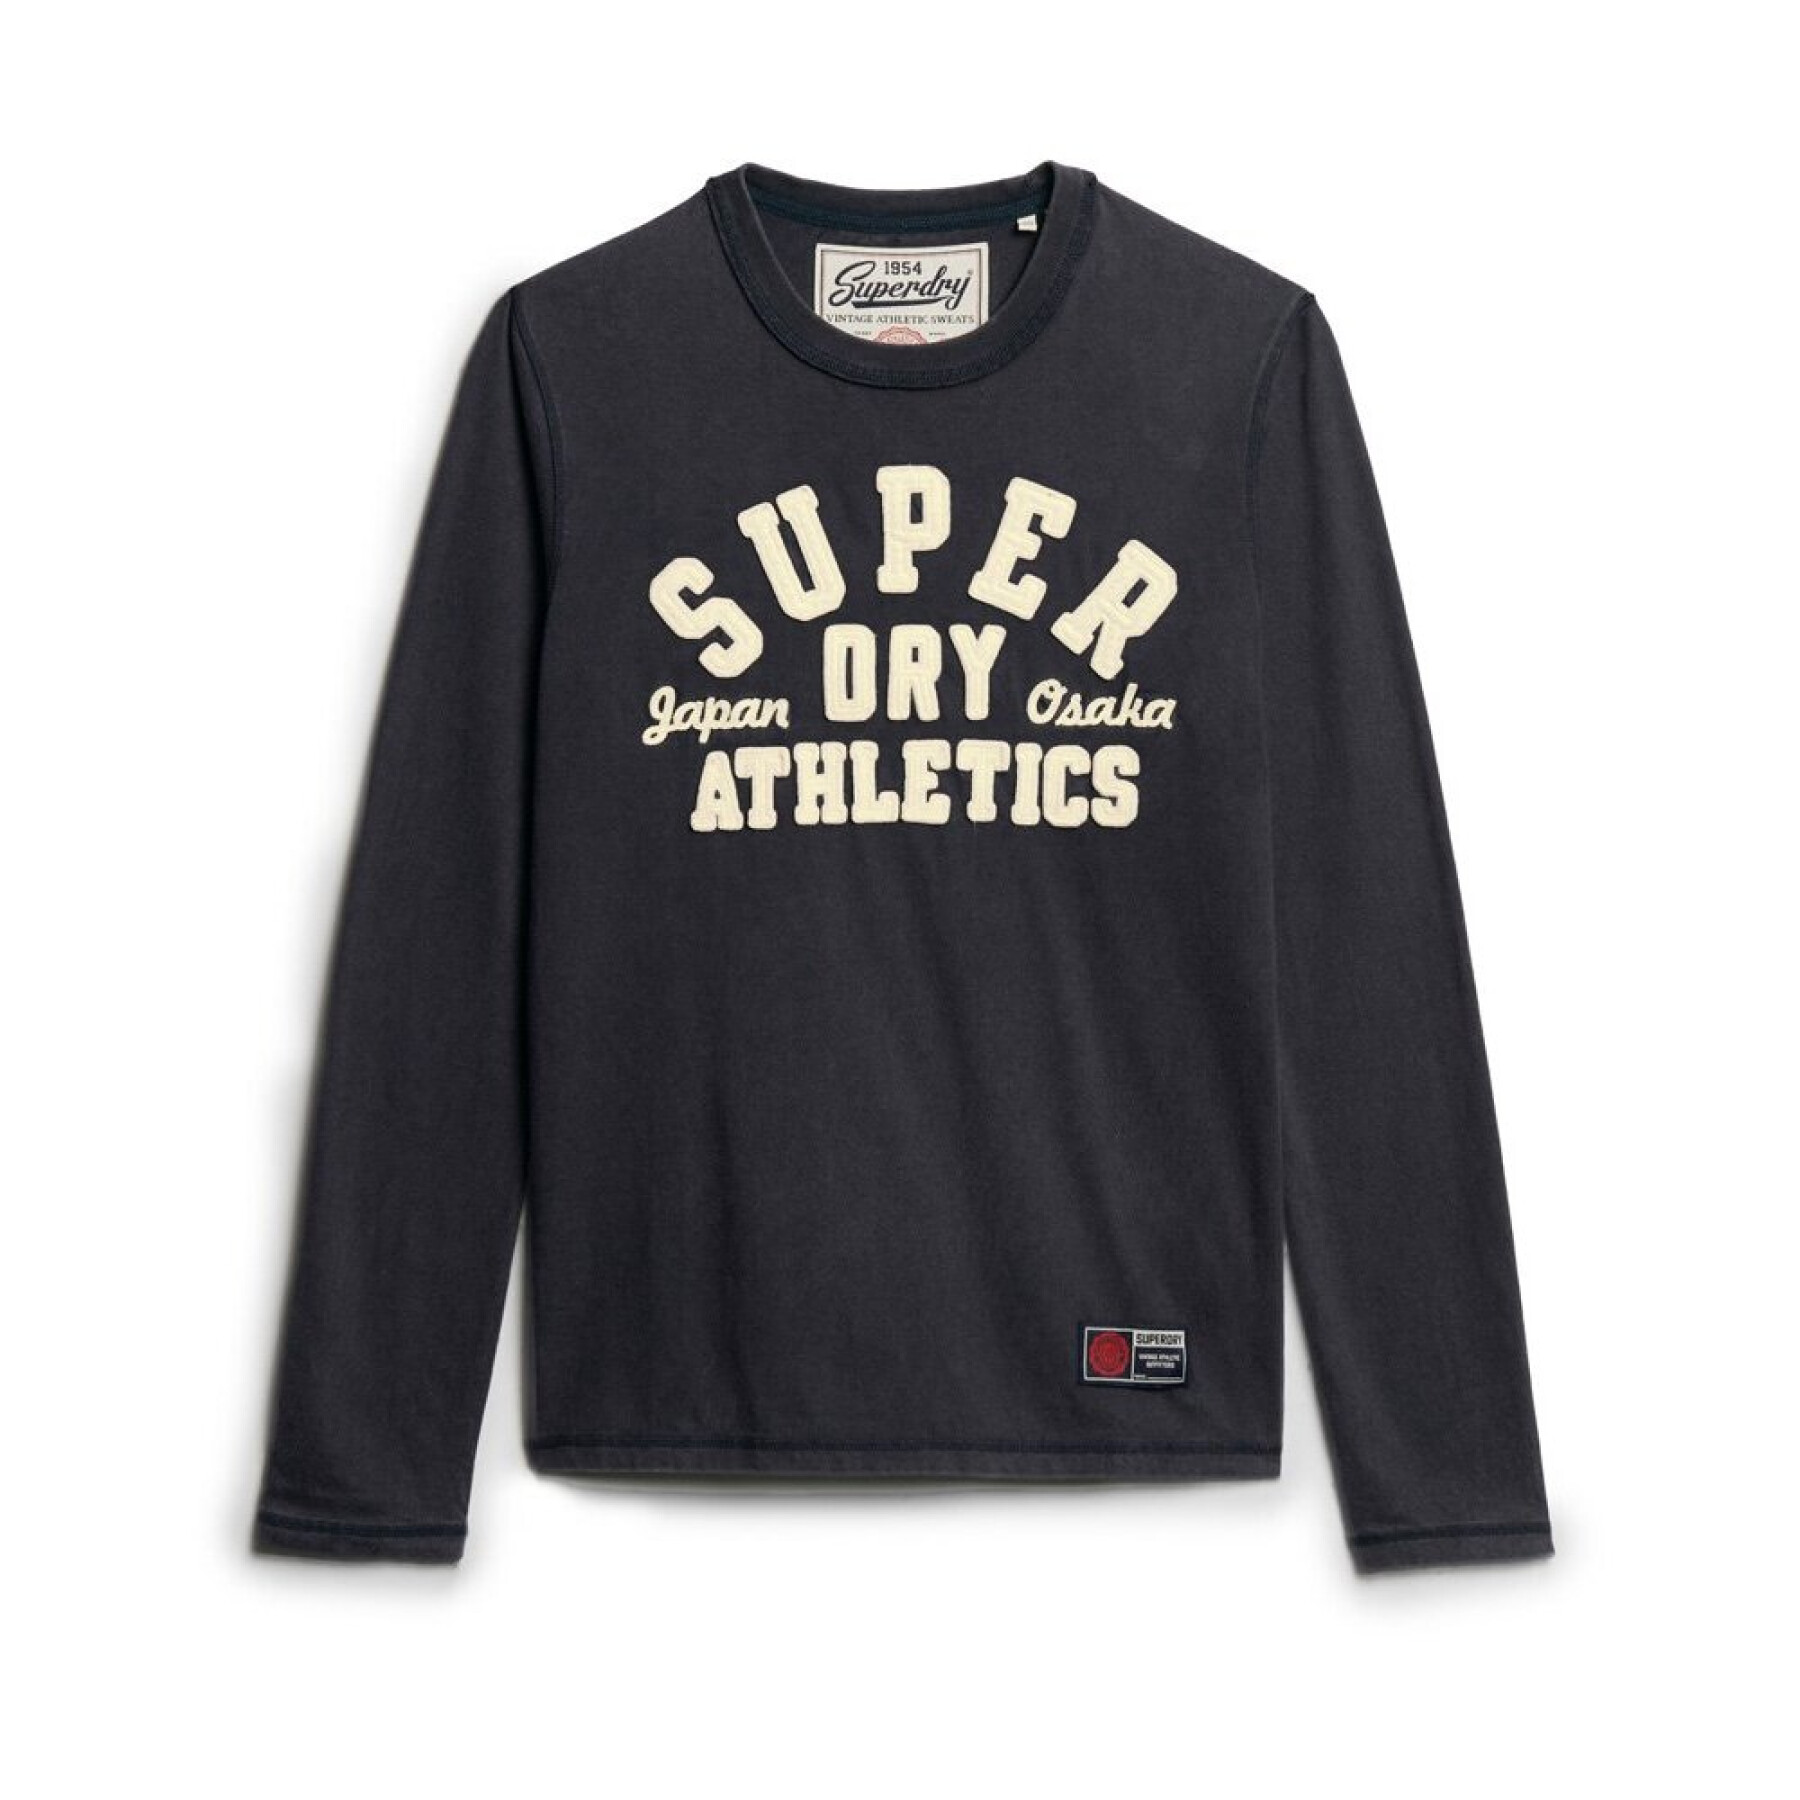 Long sleeve T-shirt Superdry Athletic